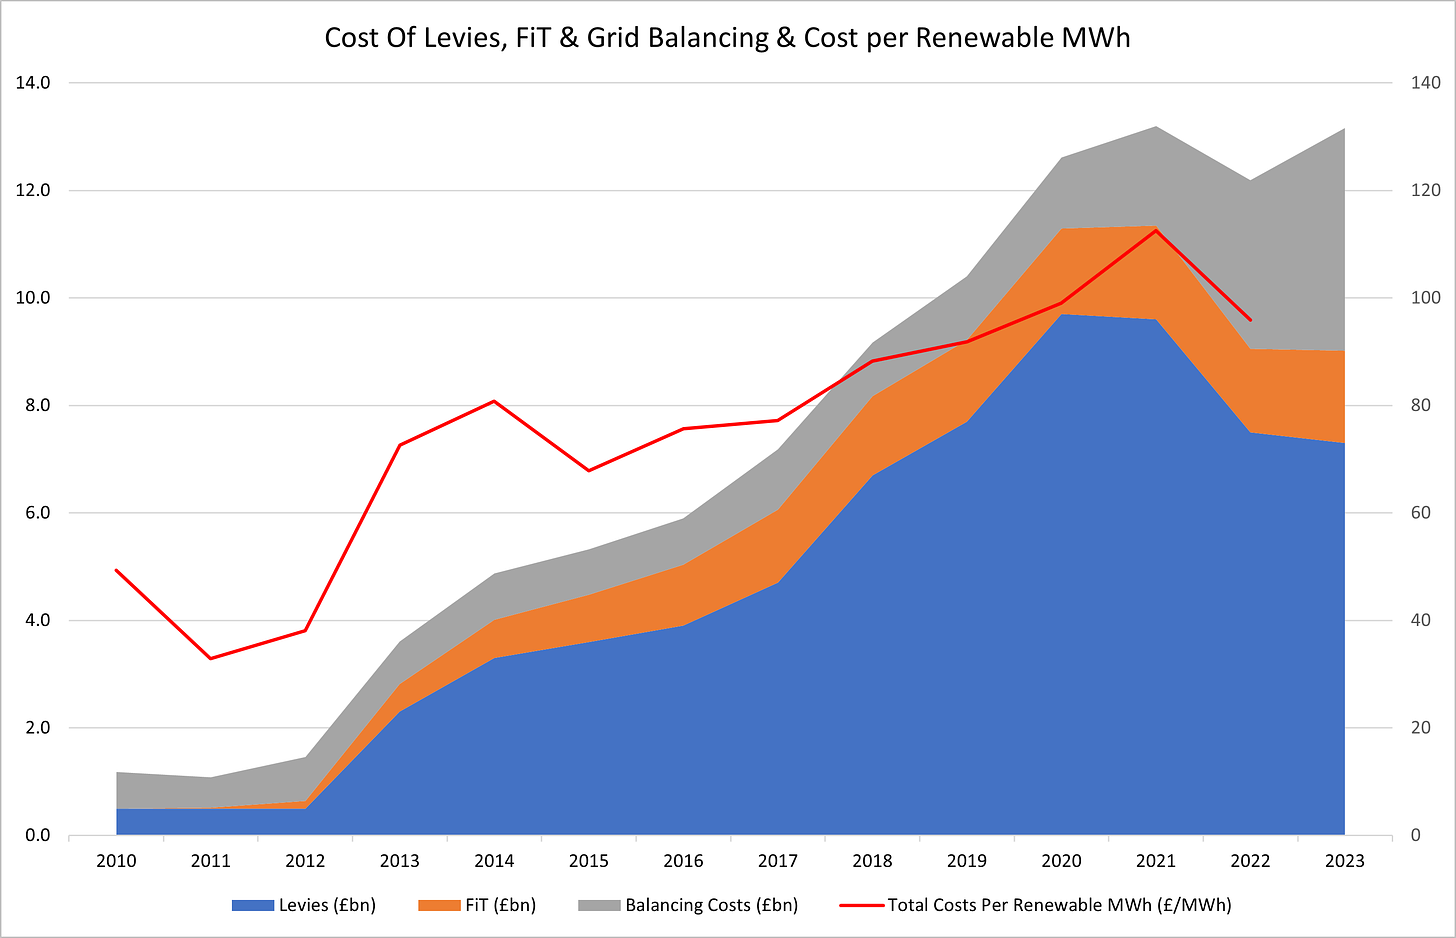 Figure 9 - Cost of Levies, FiT and Grid Balancing and Cost per Renewable MWh (£ per MWh)